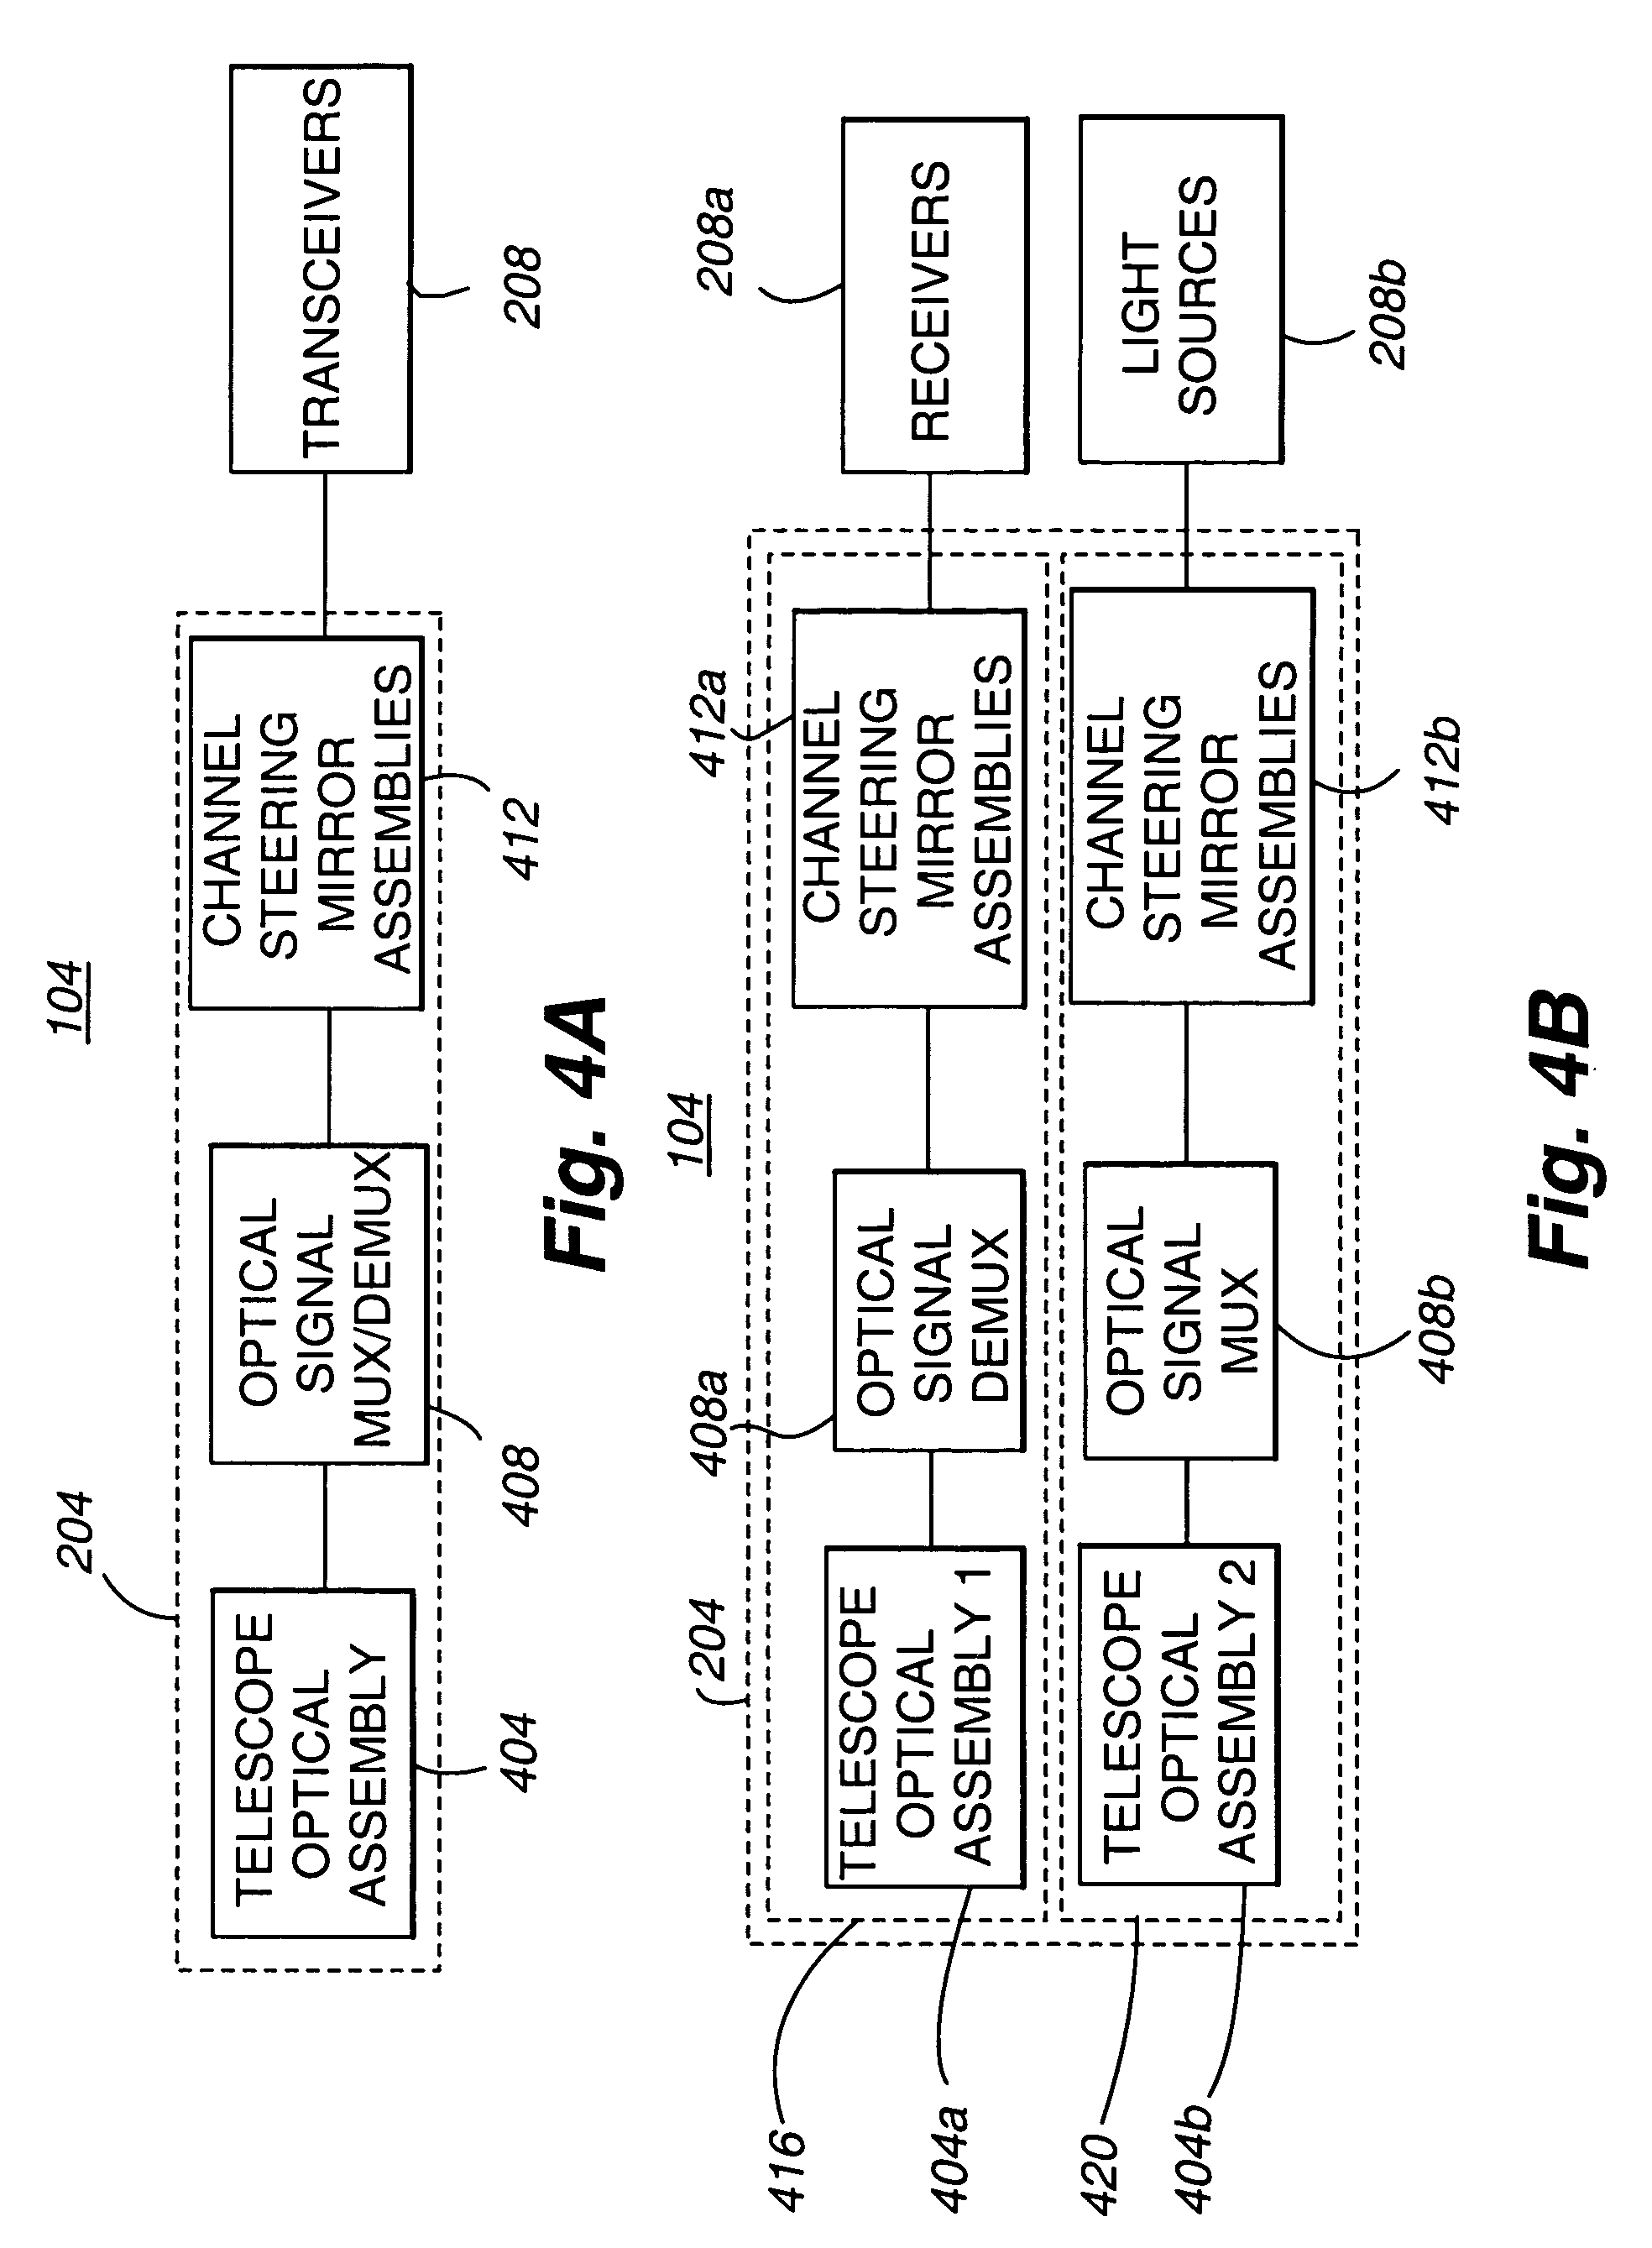 Multiple access space communications optical system using a common telescope aperture